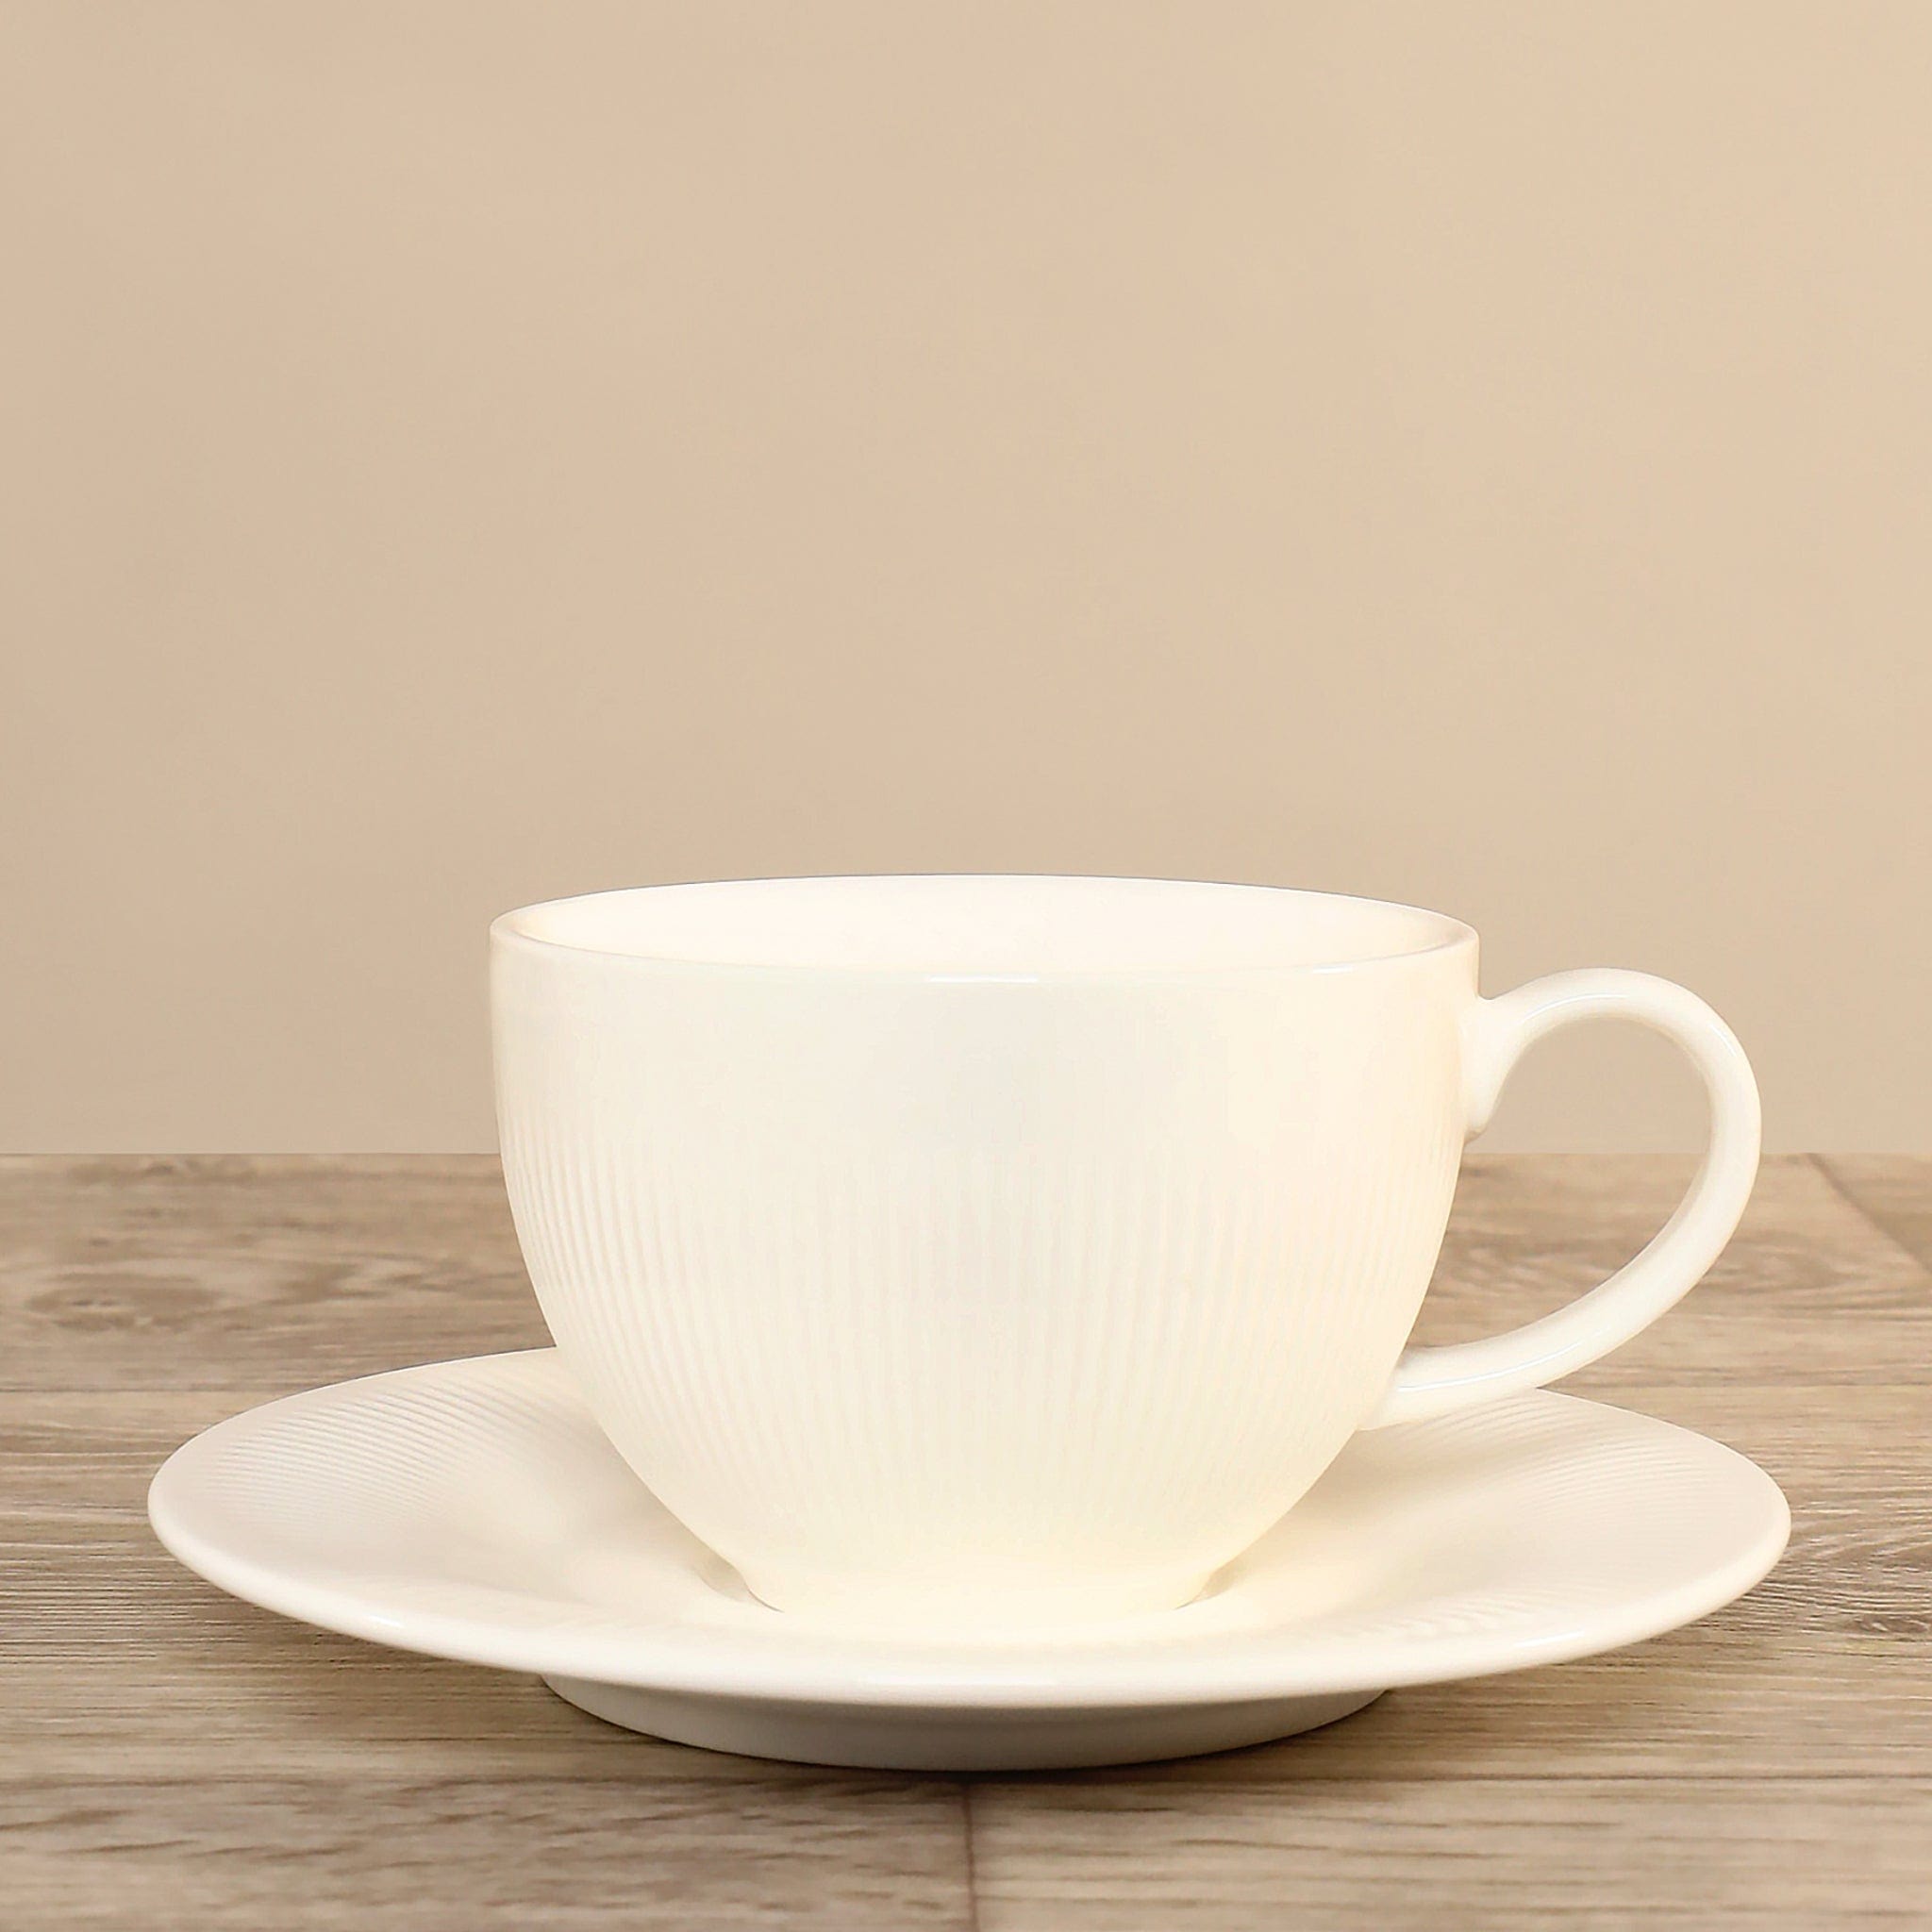 Cup With Saucer - Bloomr